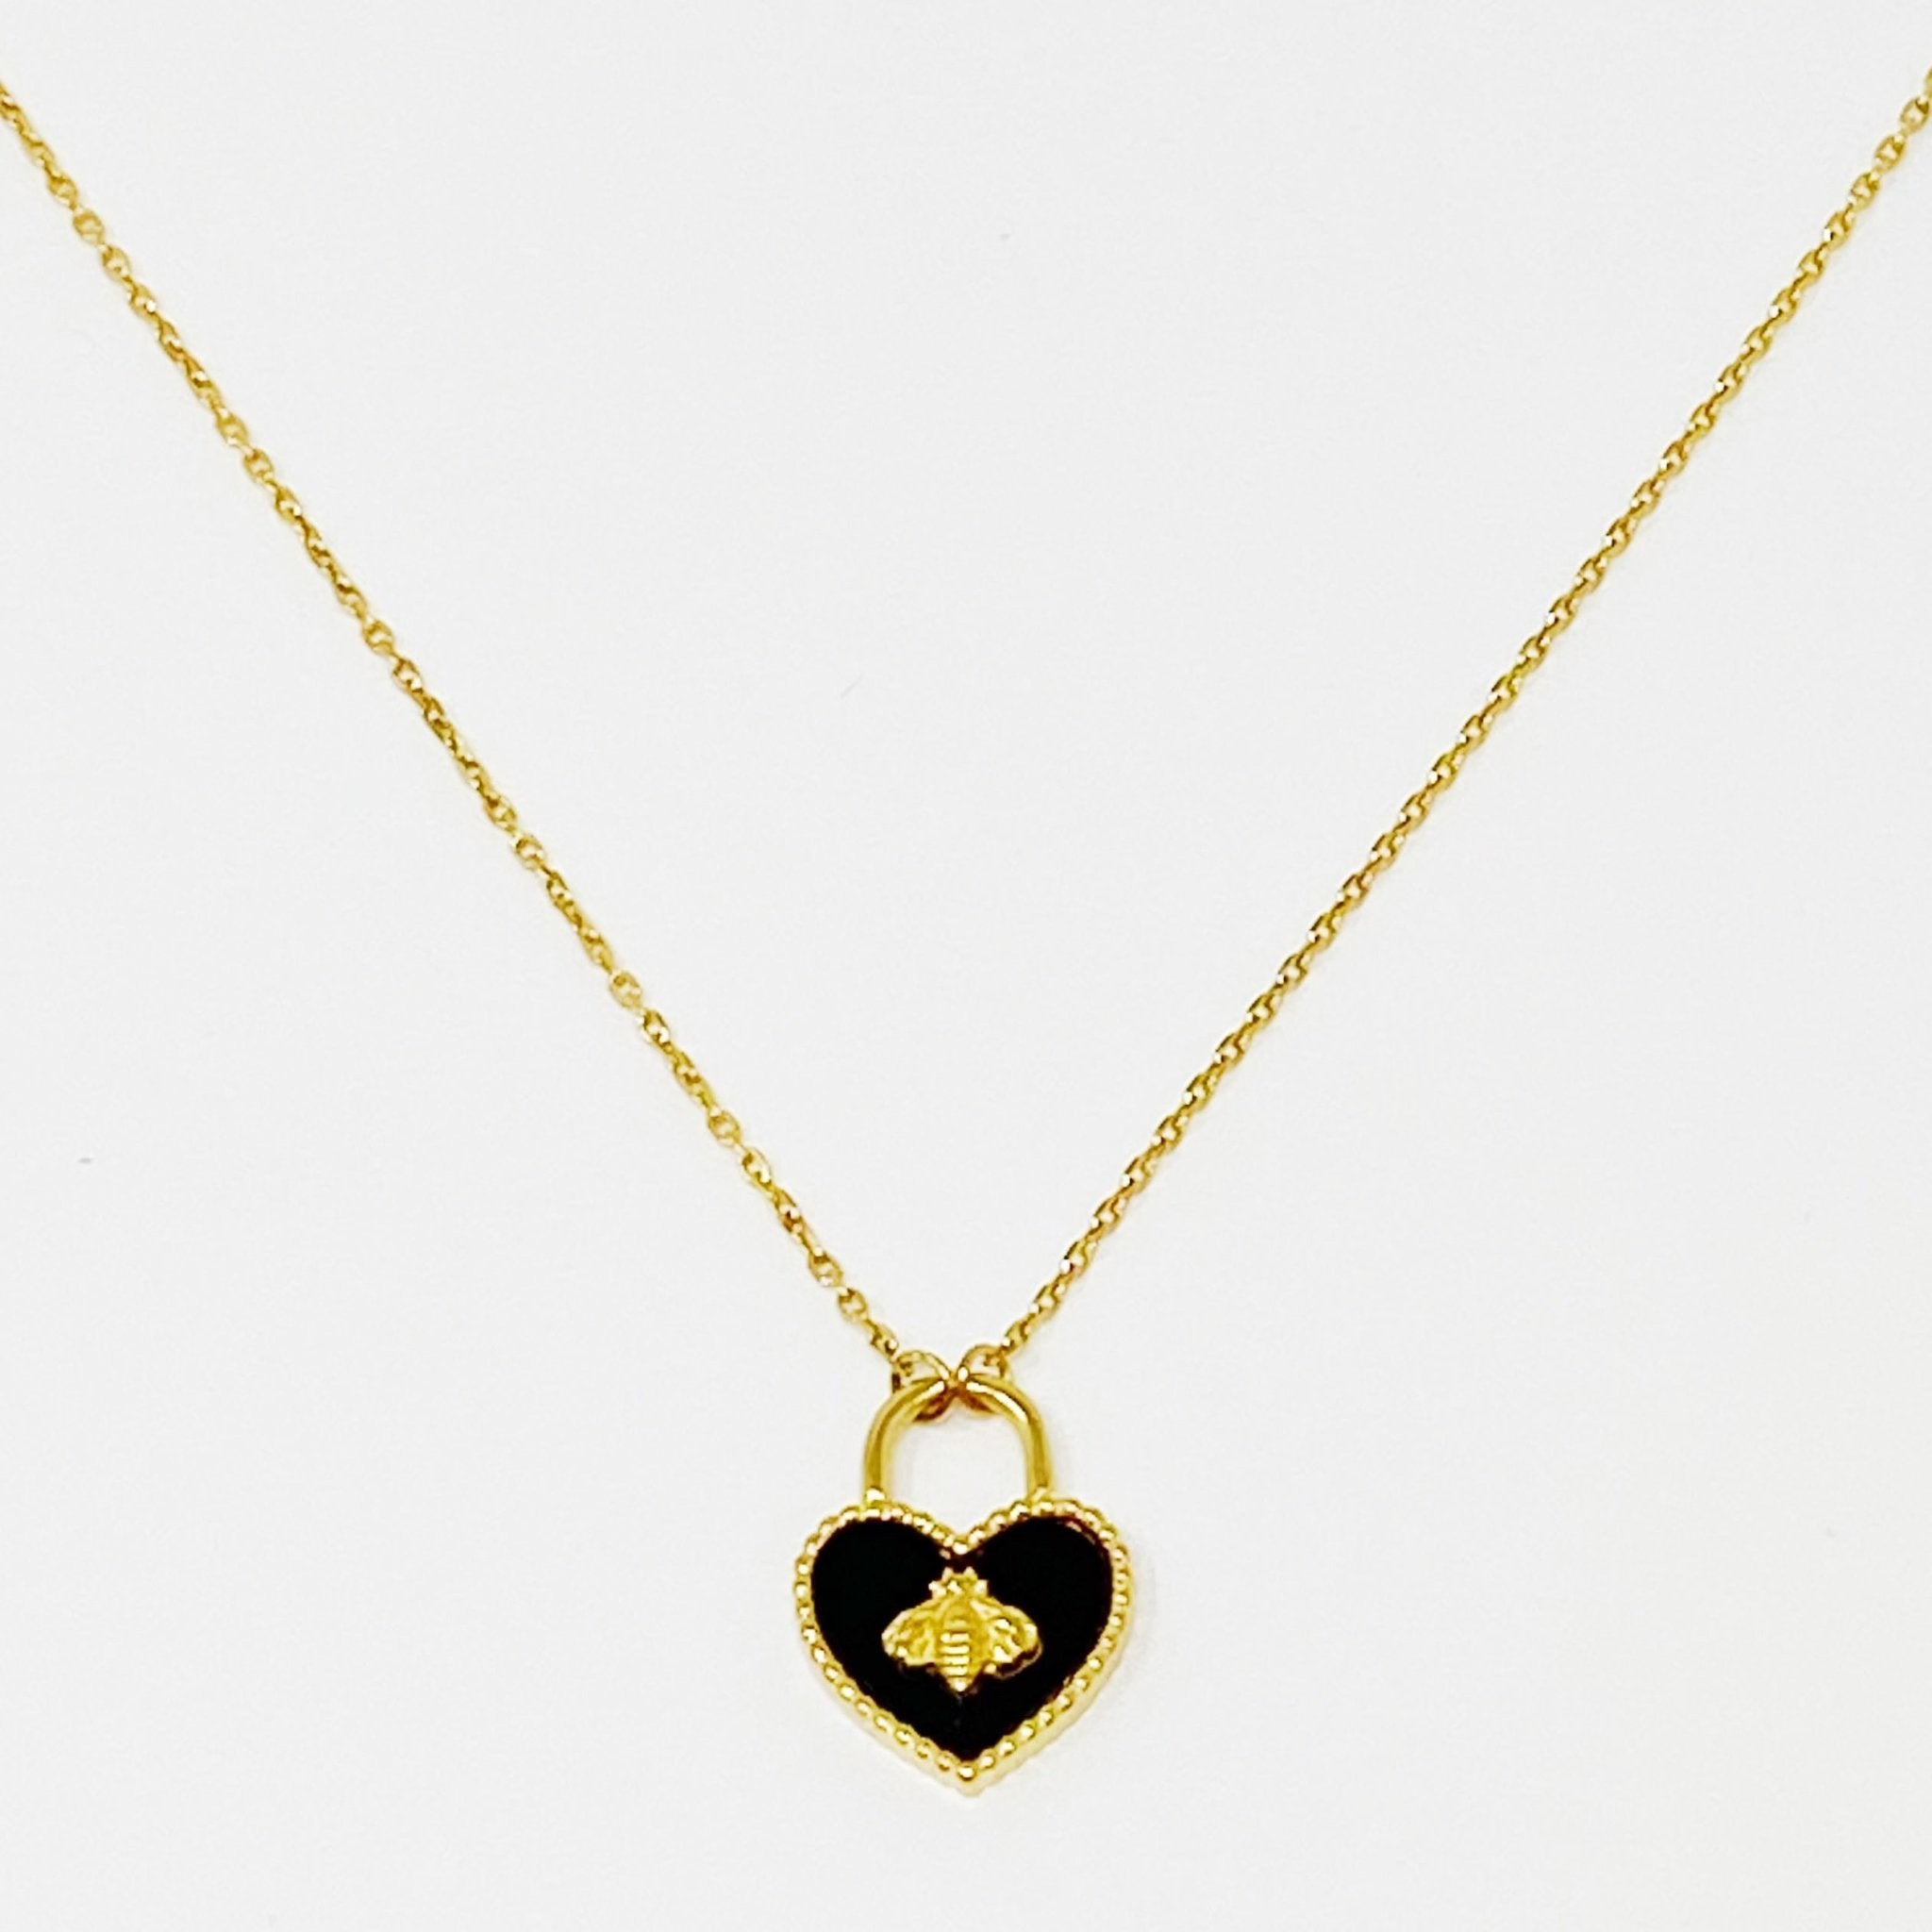 Bee Heartful Necklace - The Kindness Cause Cool Necklace